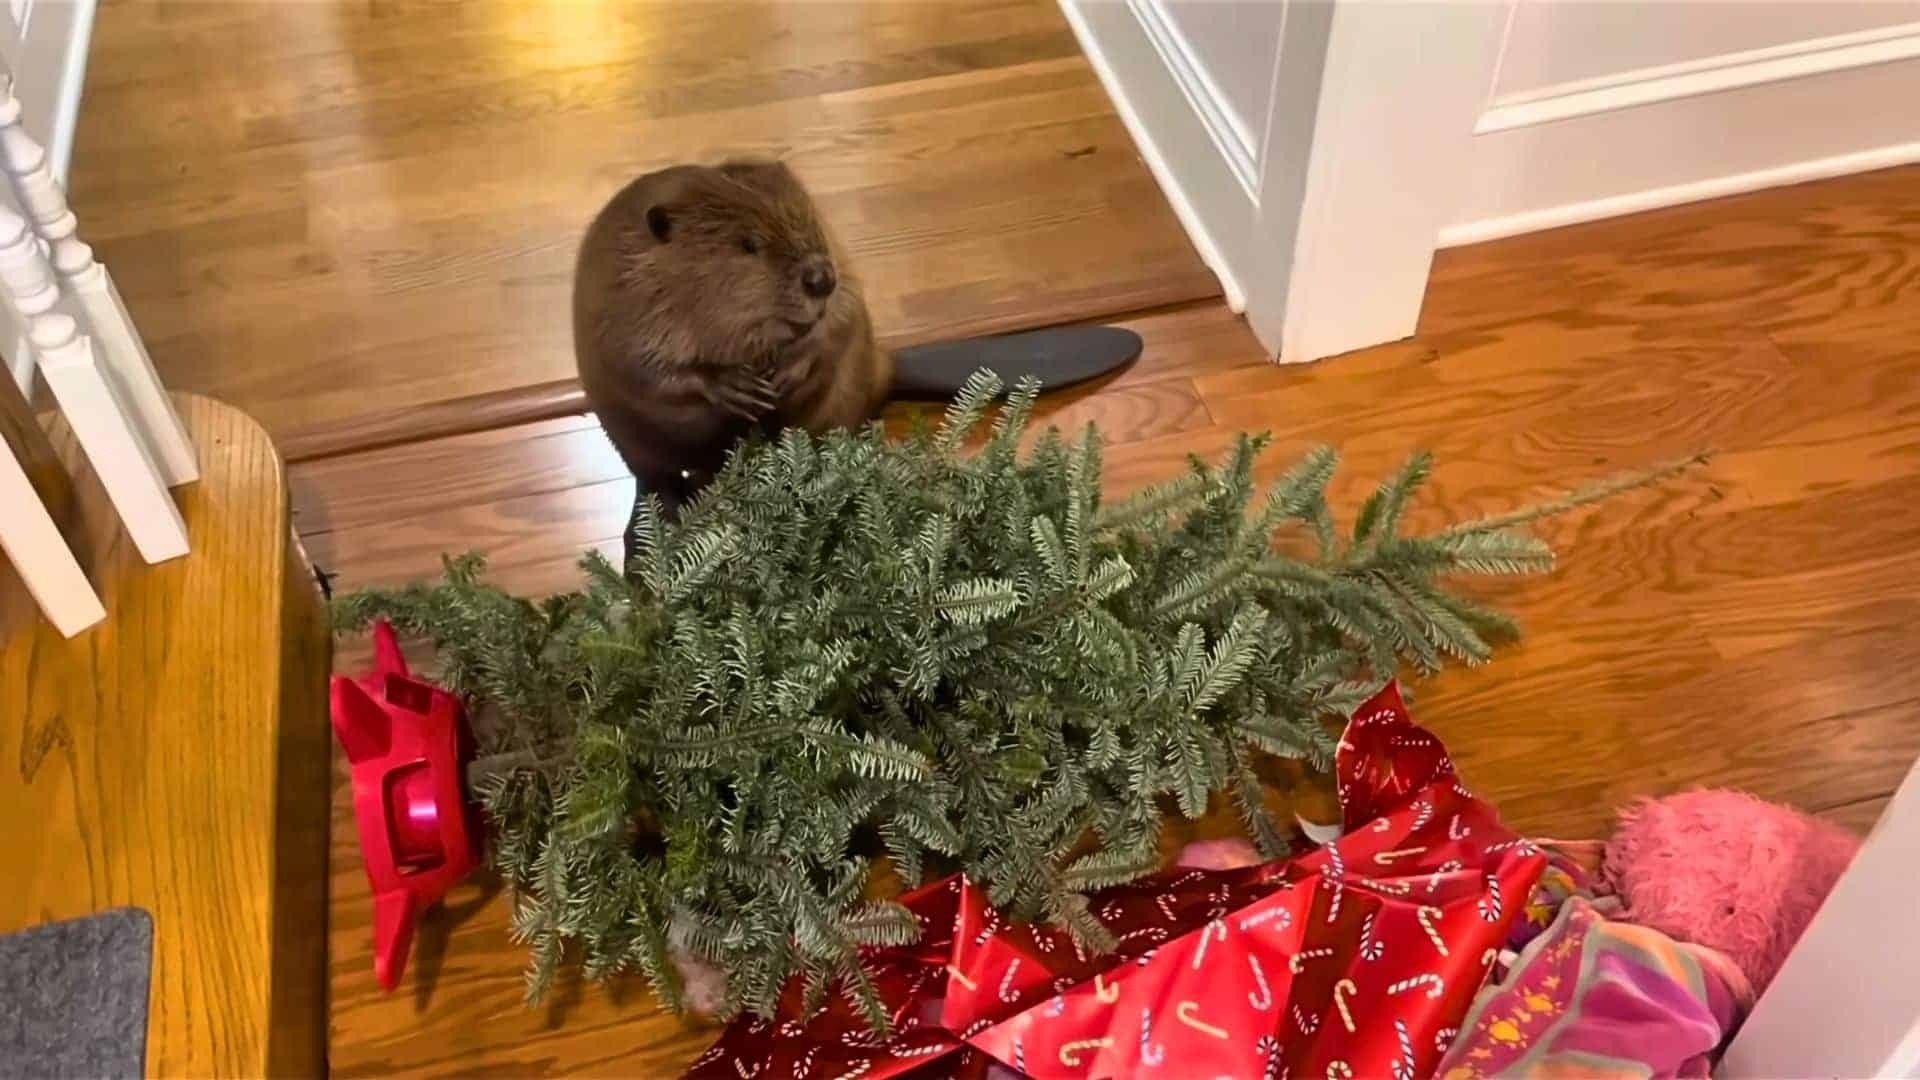 beaver builds dam with Christmas supplies